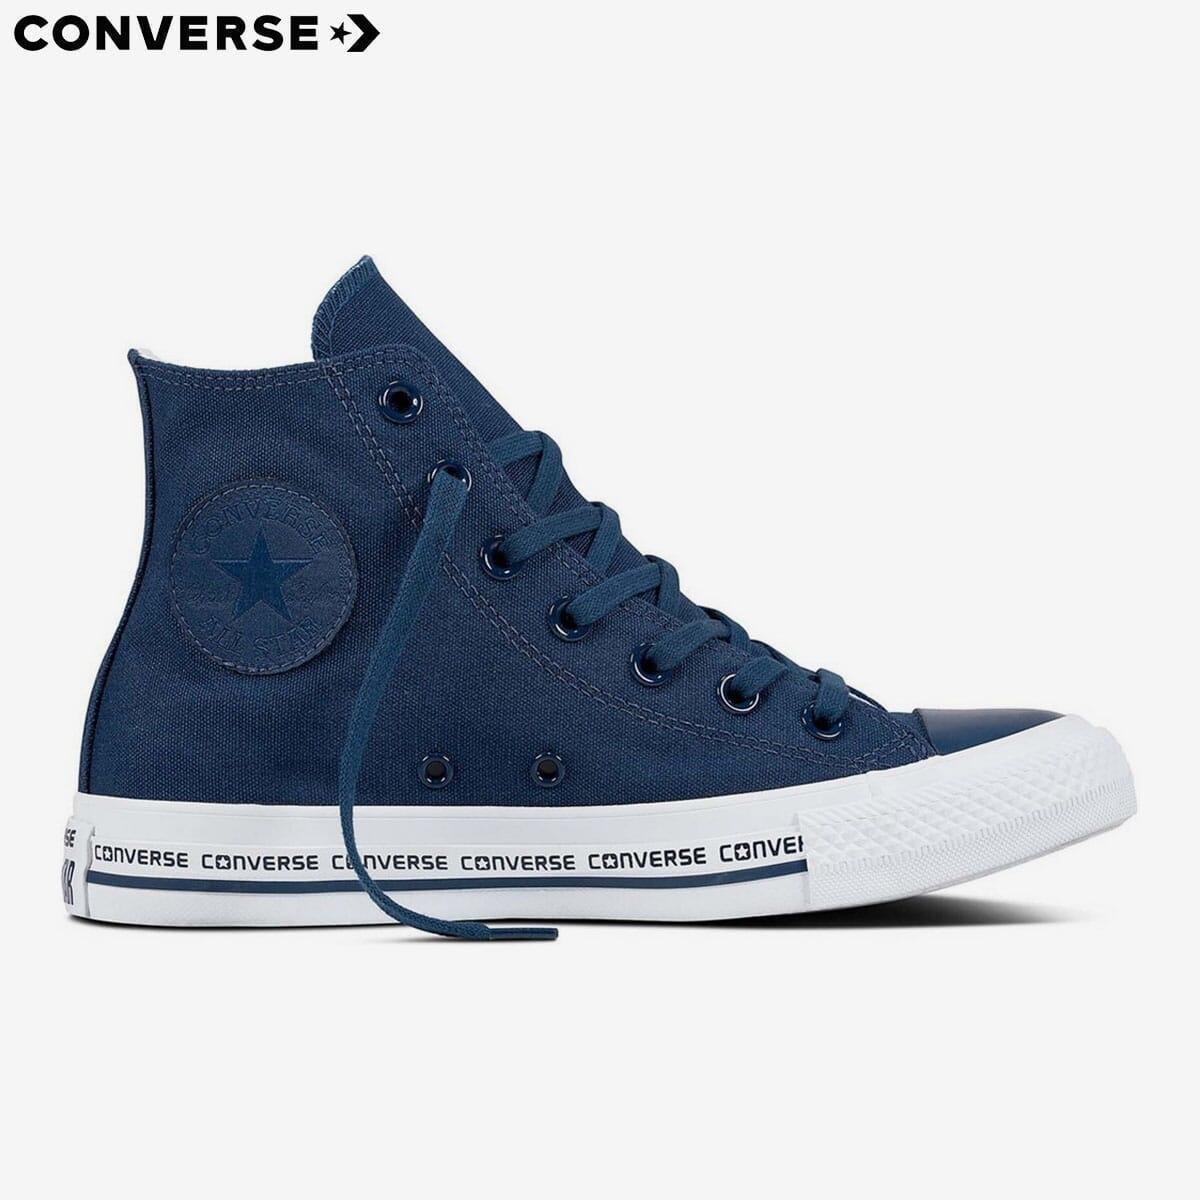 converse chuck taylor all star hi top blue wordmark shoes for unisex 159585c